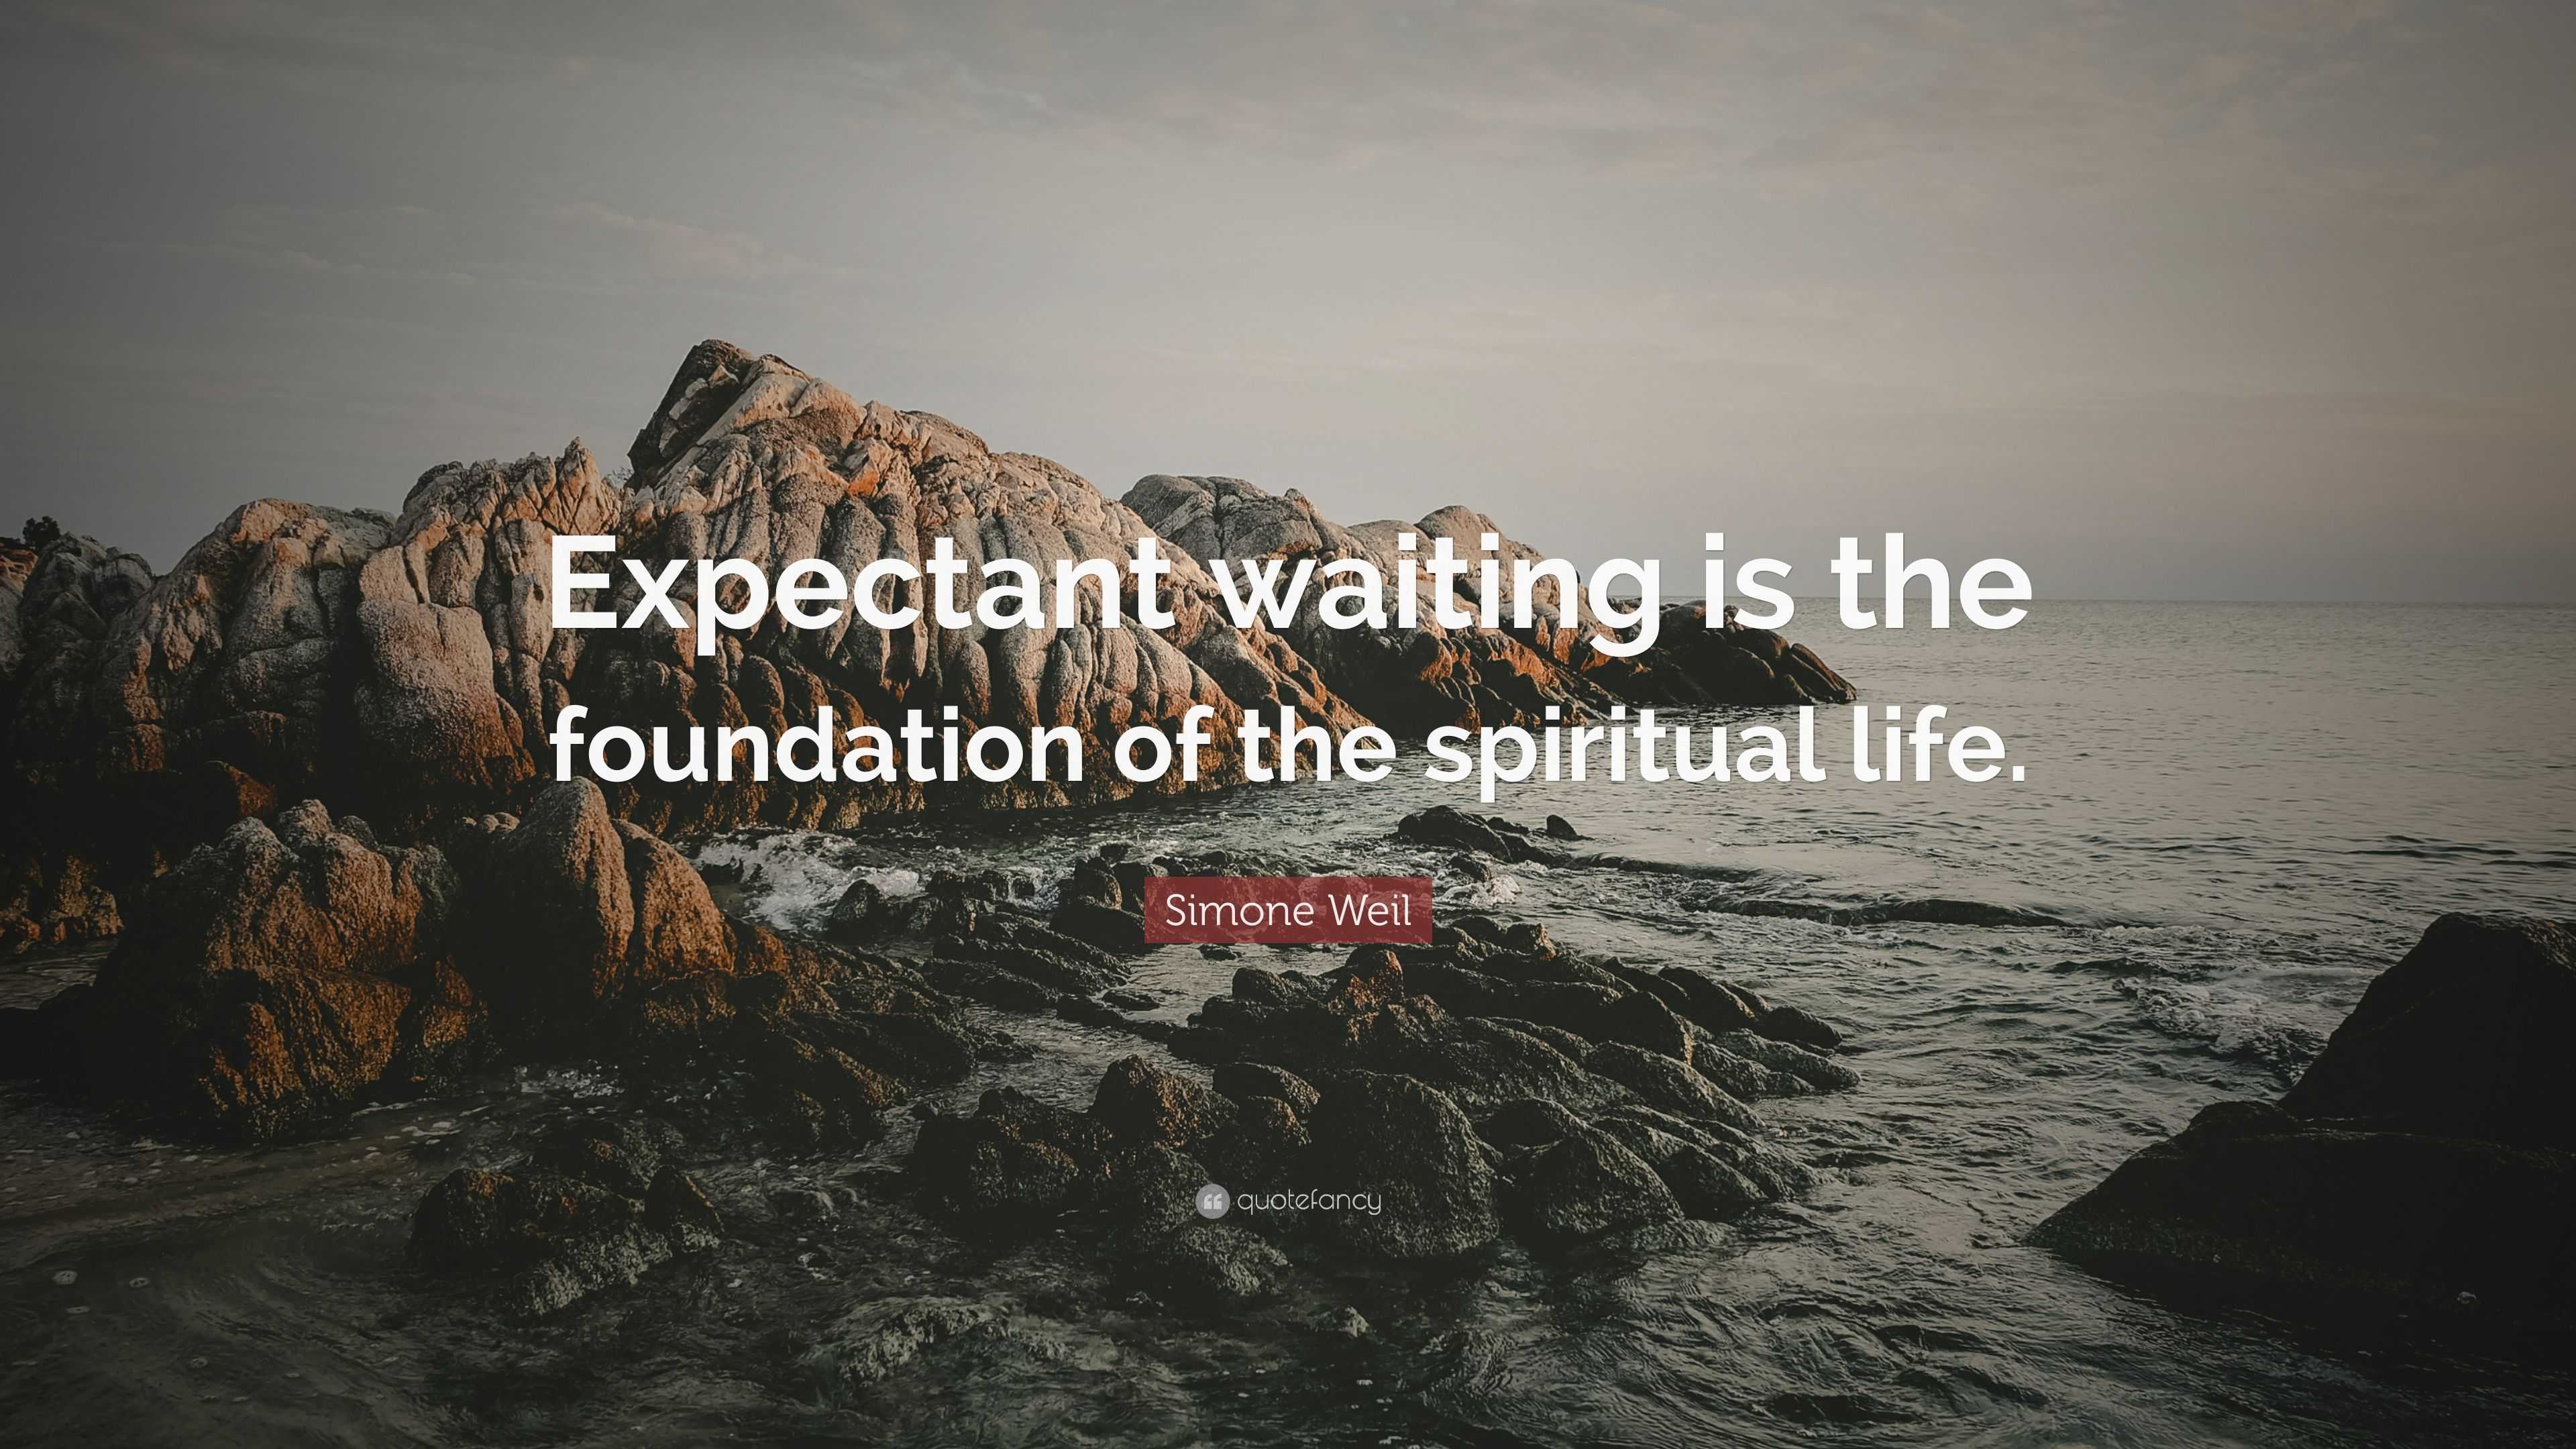 Simone Weil Quote: “Expectant waiting is the foundation of the